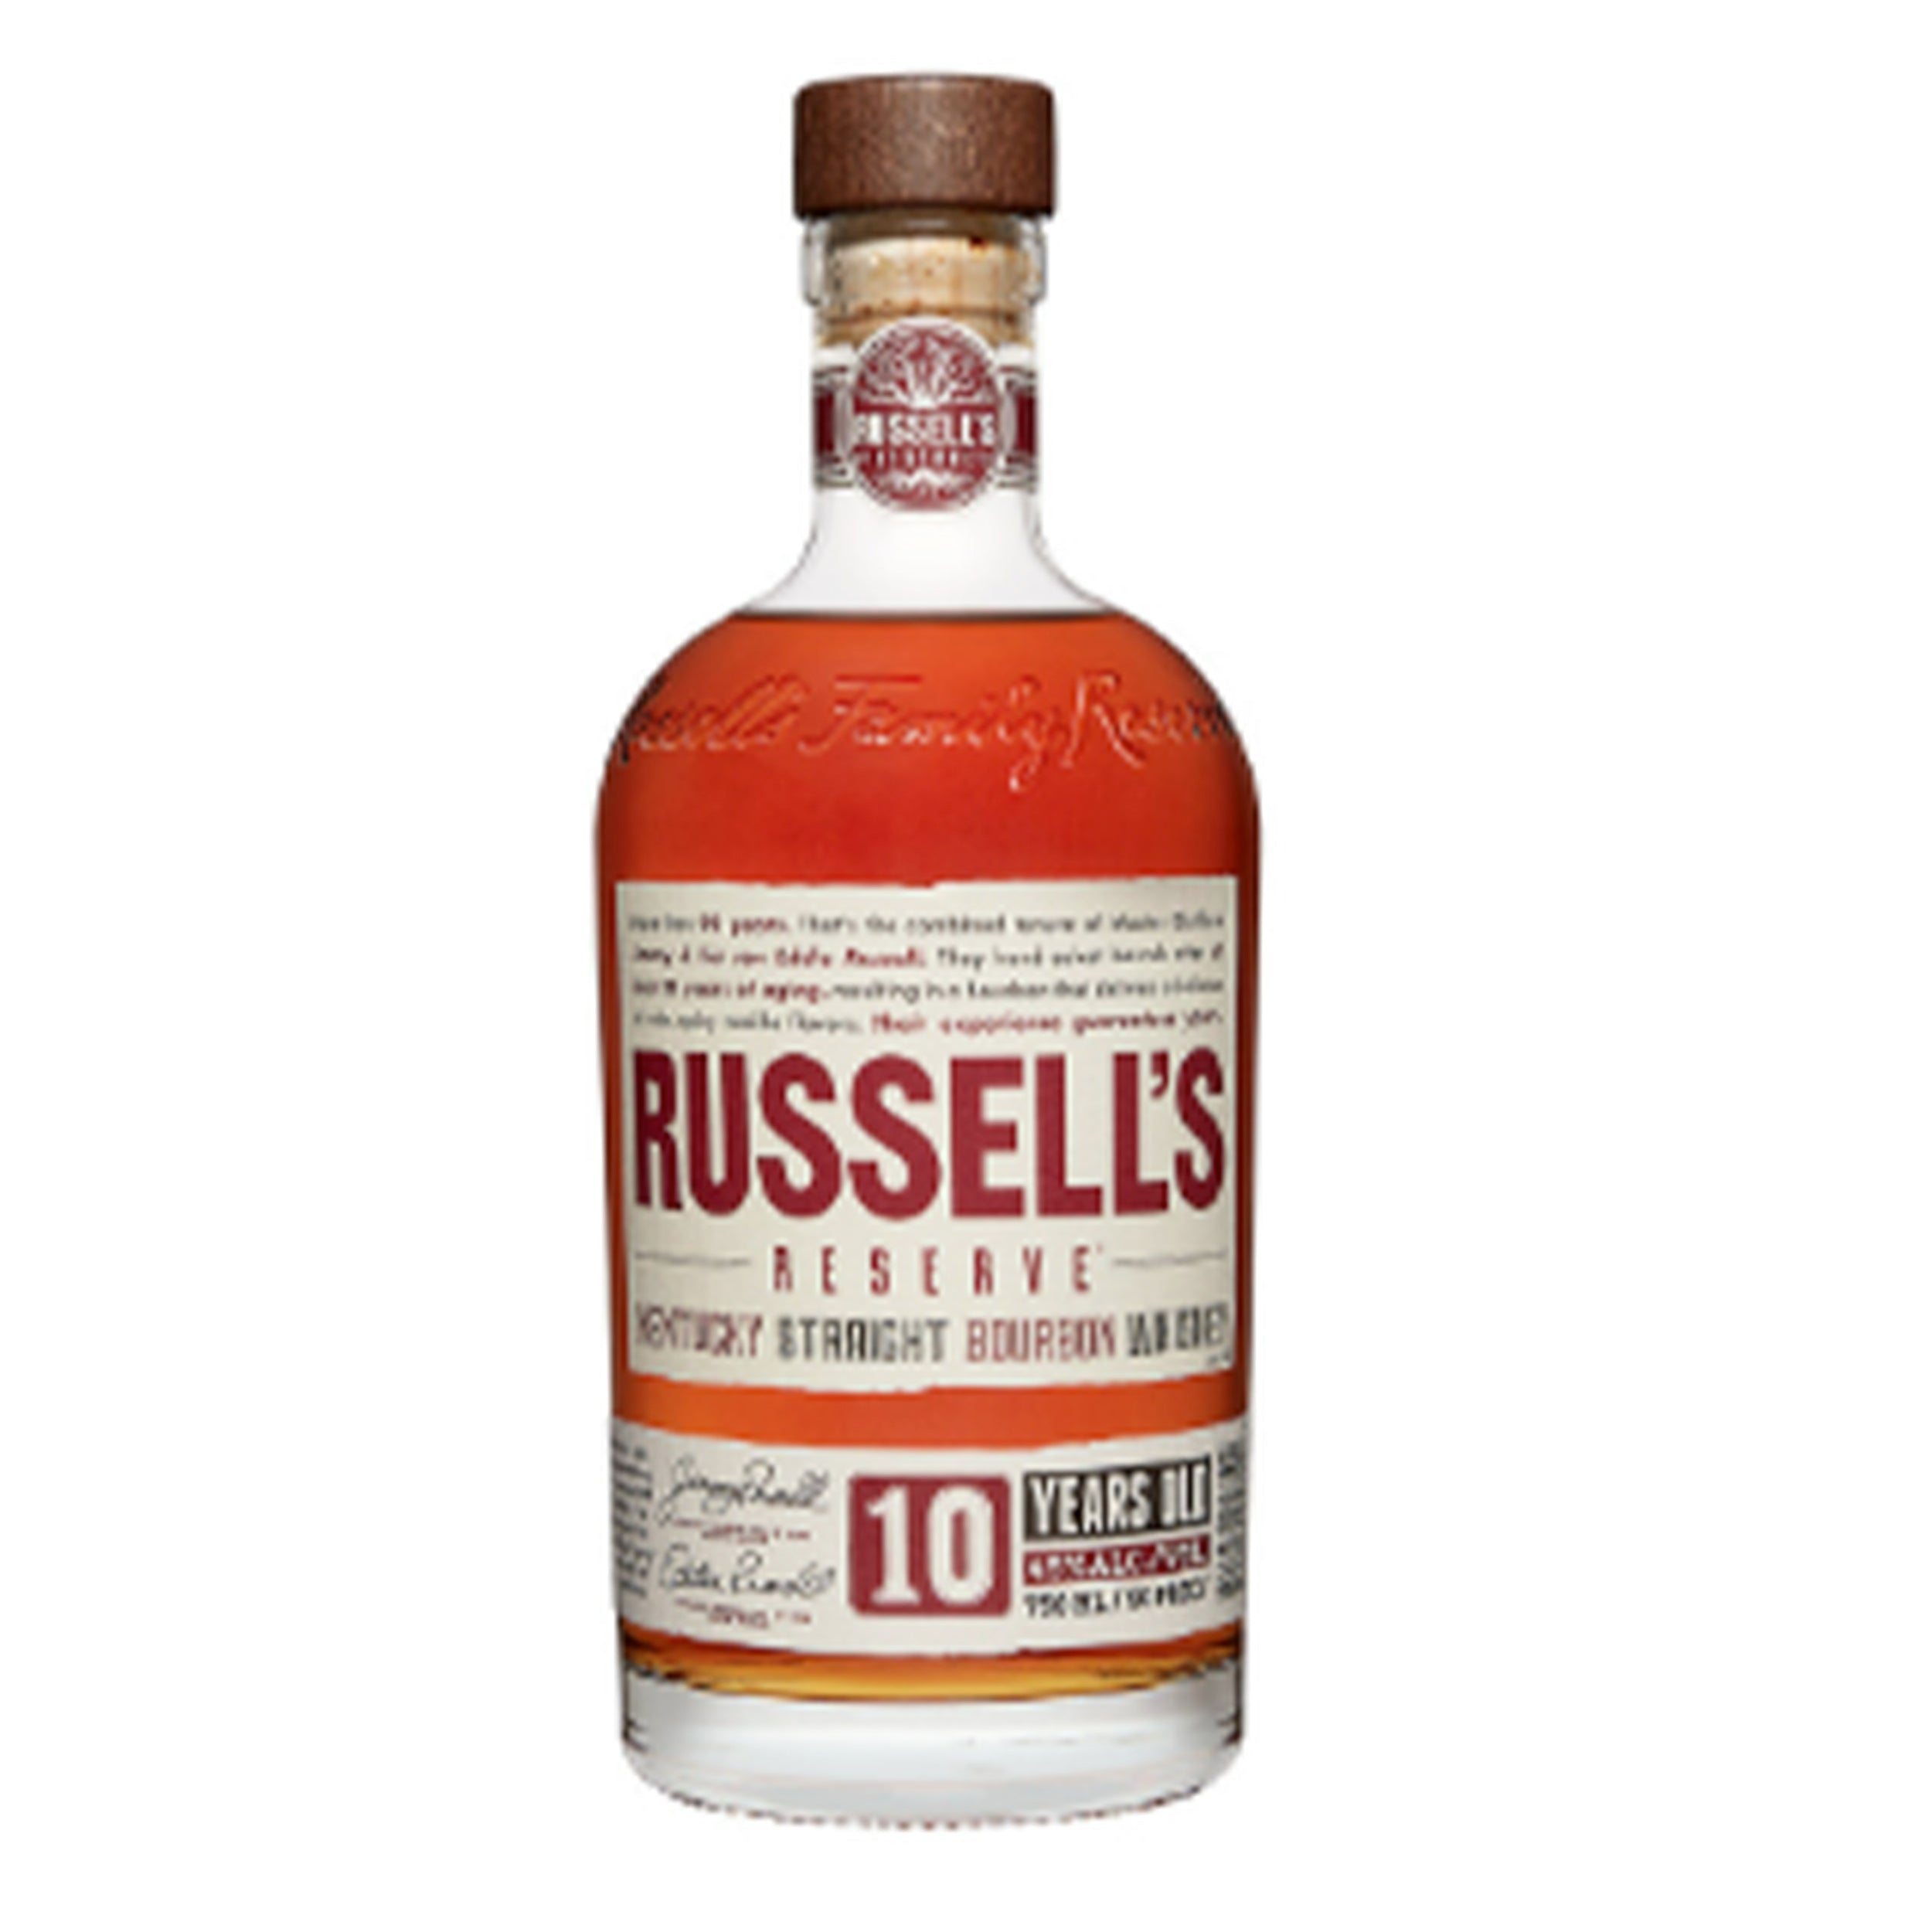 RUSSELL'S RESERVE STRAIGHT BOURBON 10 YR